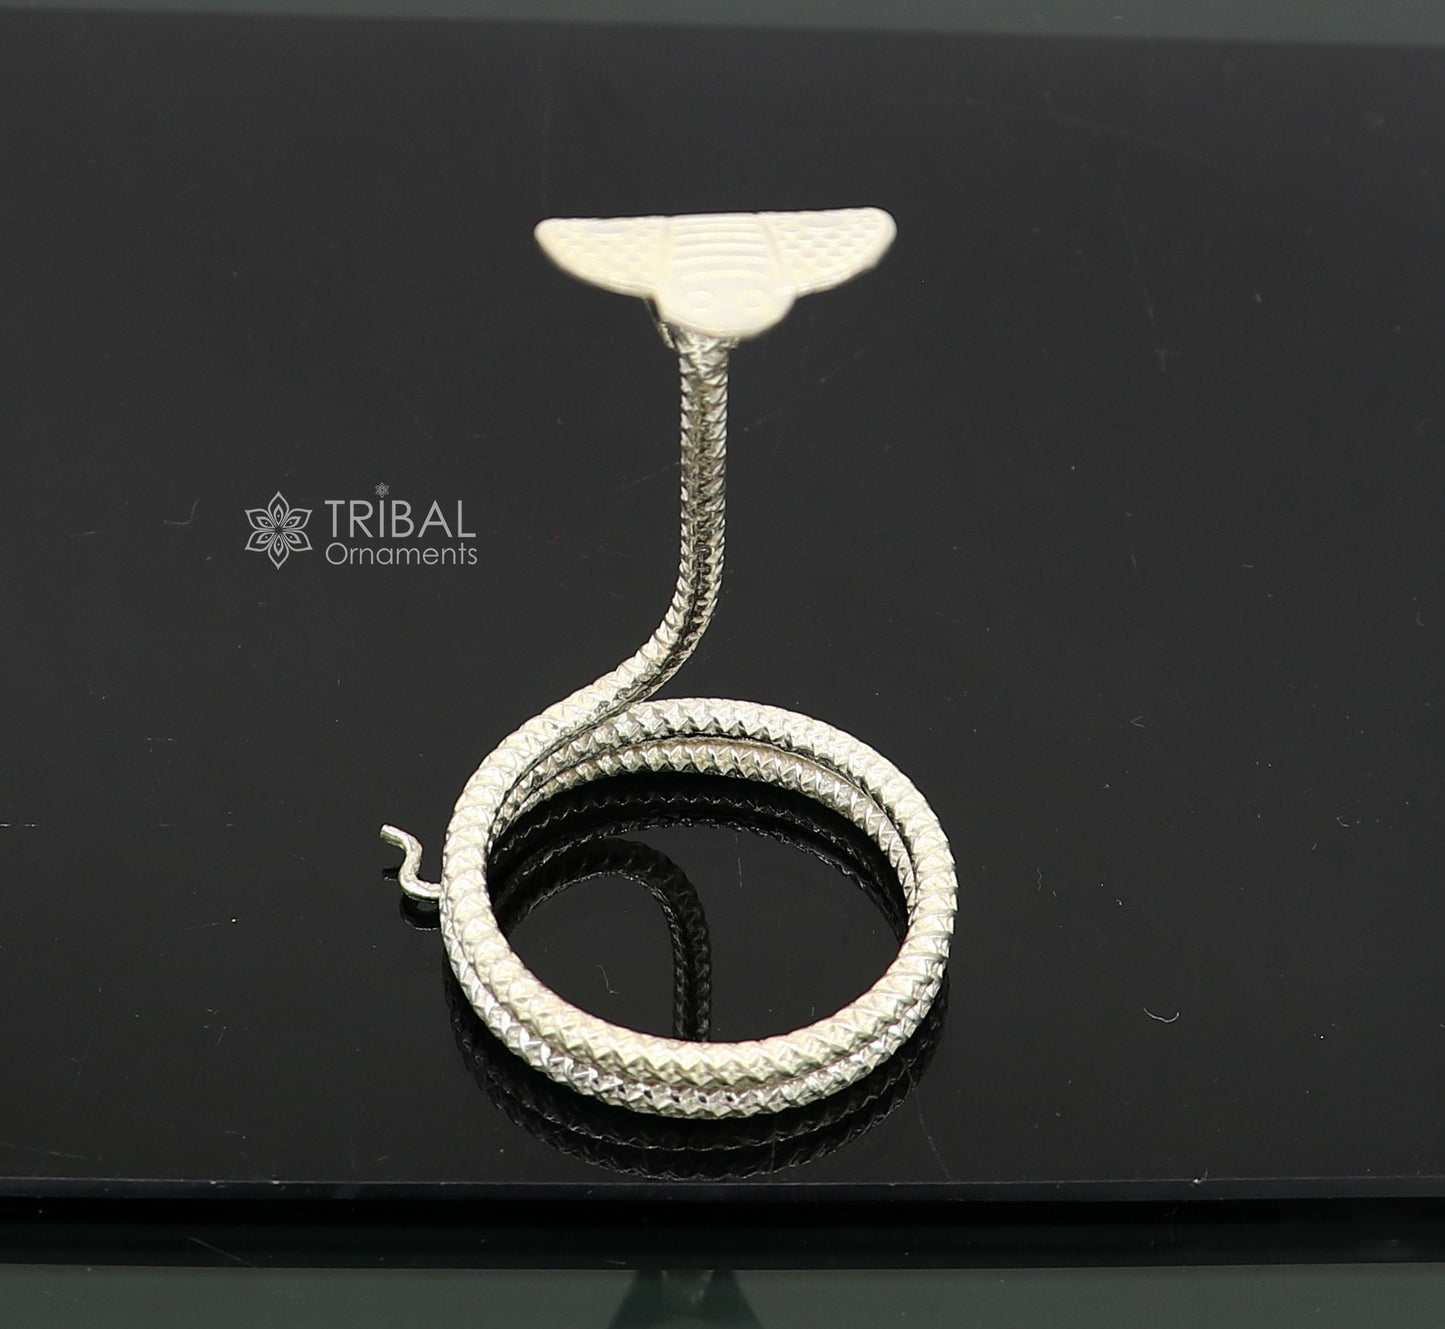 Shiva Snake Solid silver handmade Divine vintage style mini snake or shiva snake for puja or worshipping, solid Diwali puja article su1147 - TRIBAL ORNAMENTS